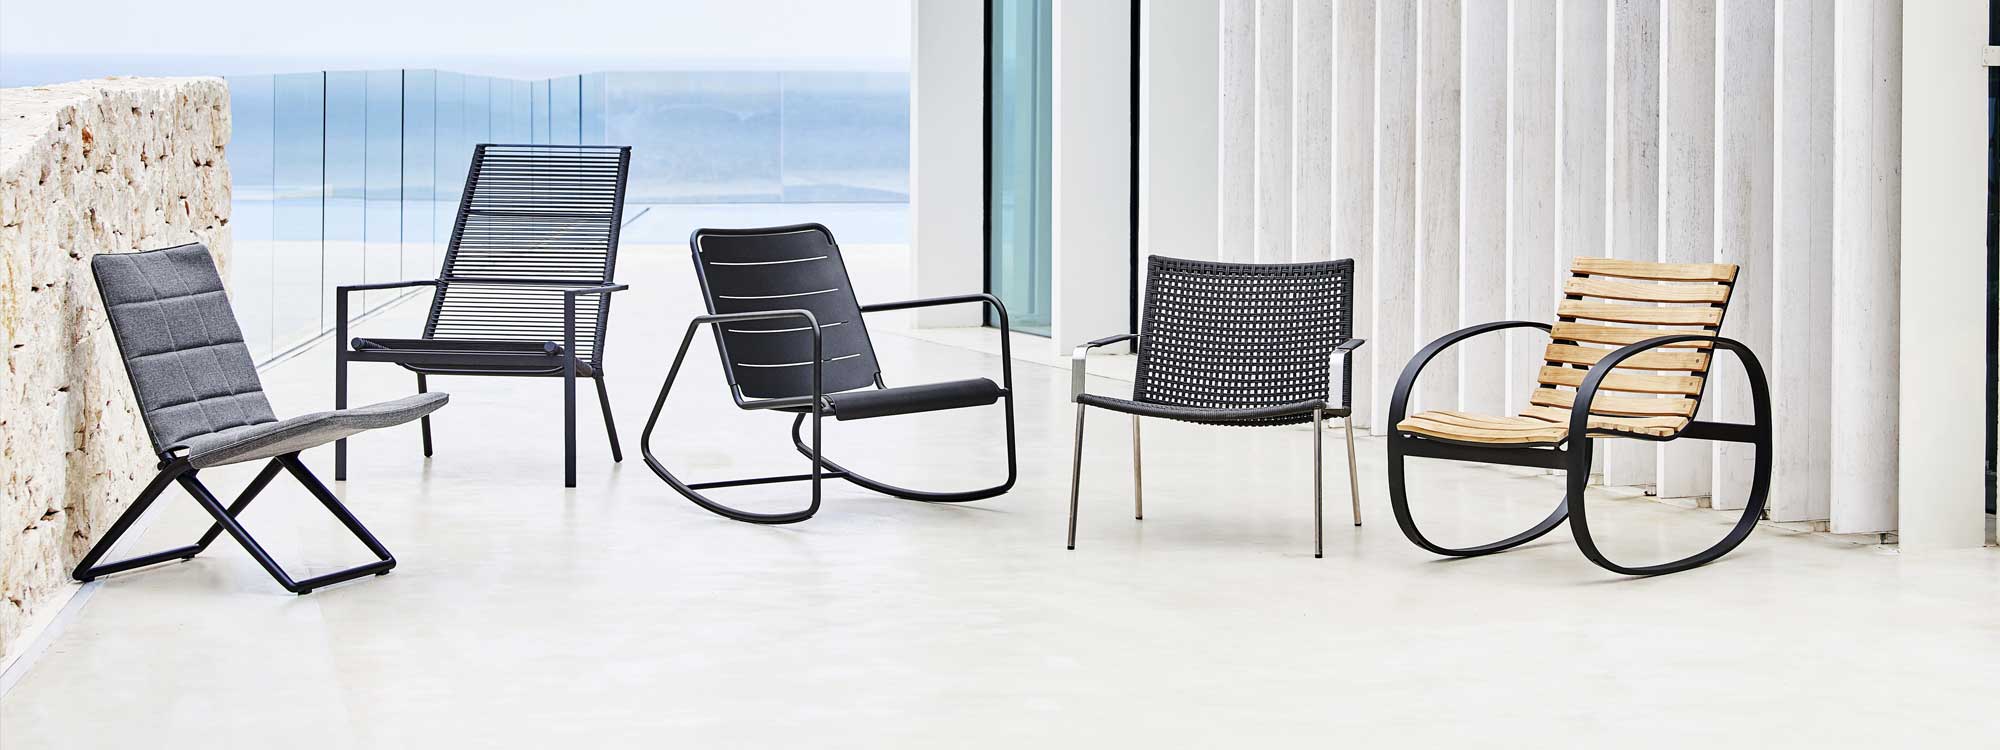 Image of Caneline lounge chairs, including Edge high back chair, Straw stacking chair, Traveller folding chair and Copehagen rocking chair